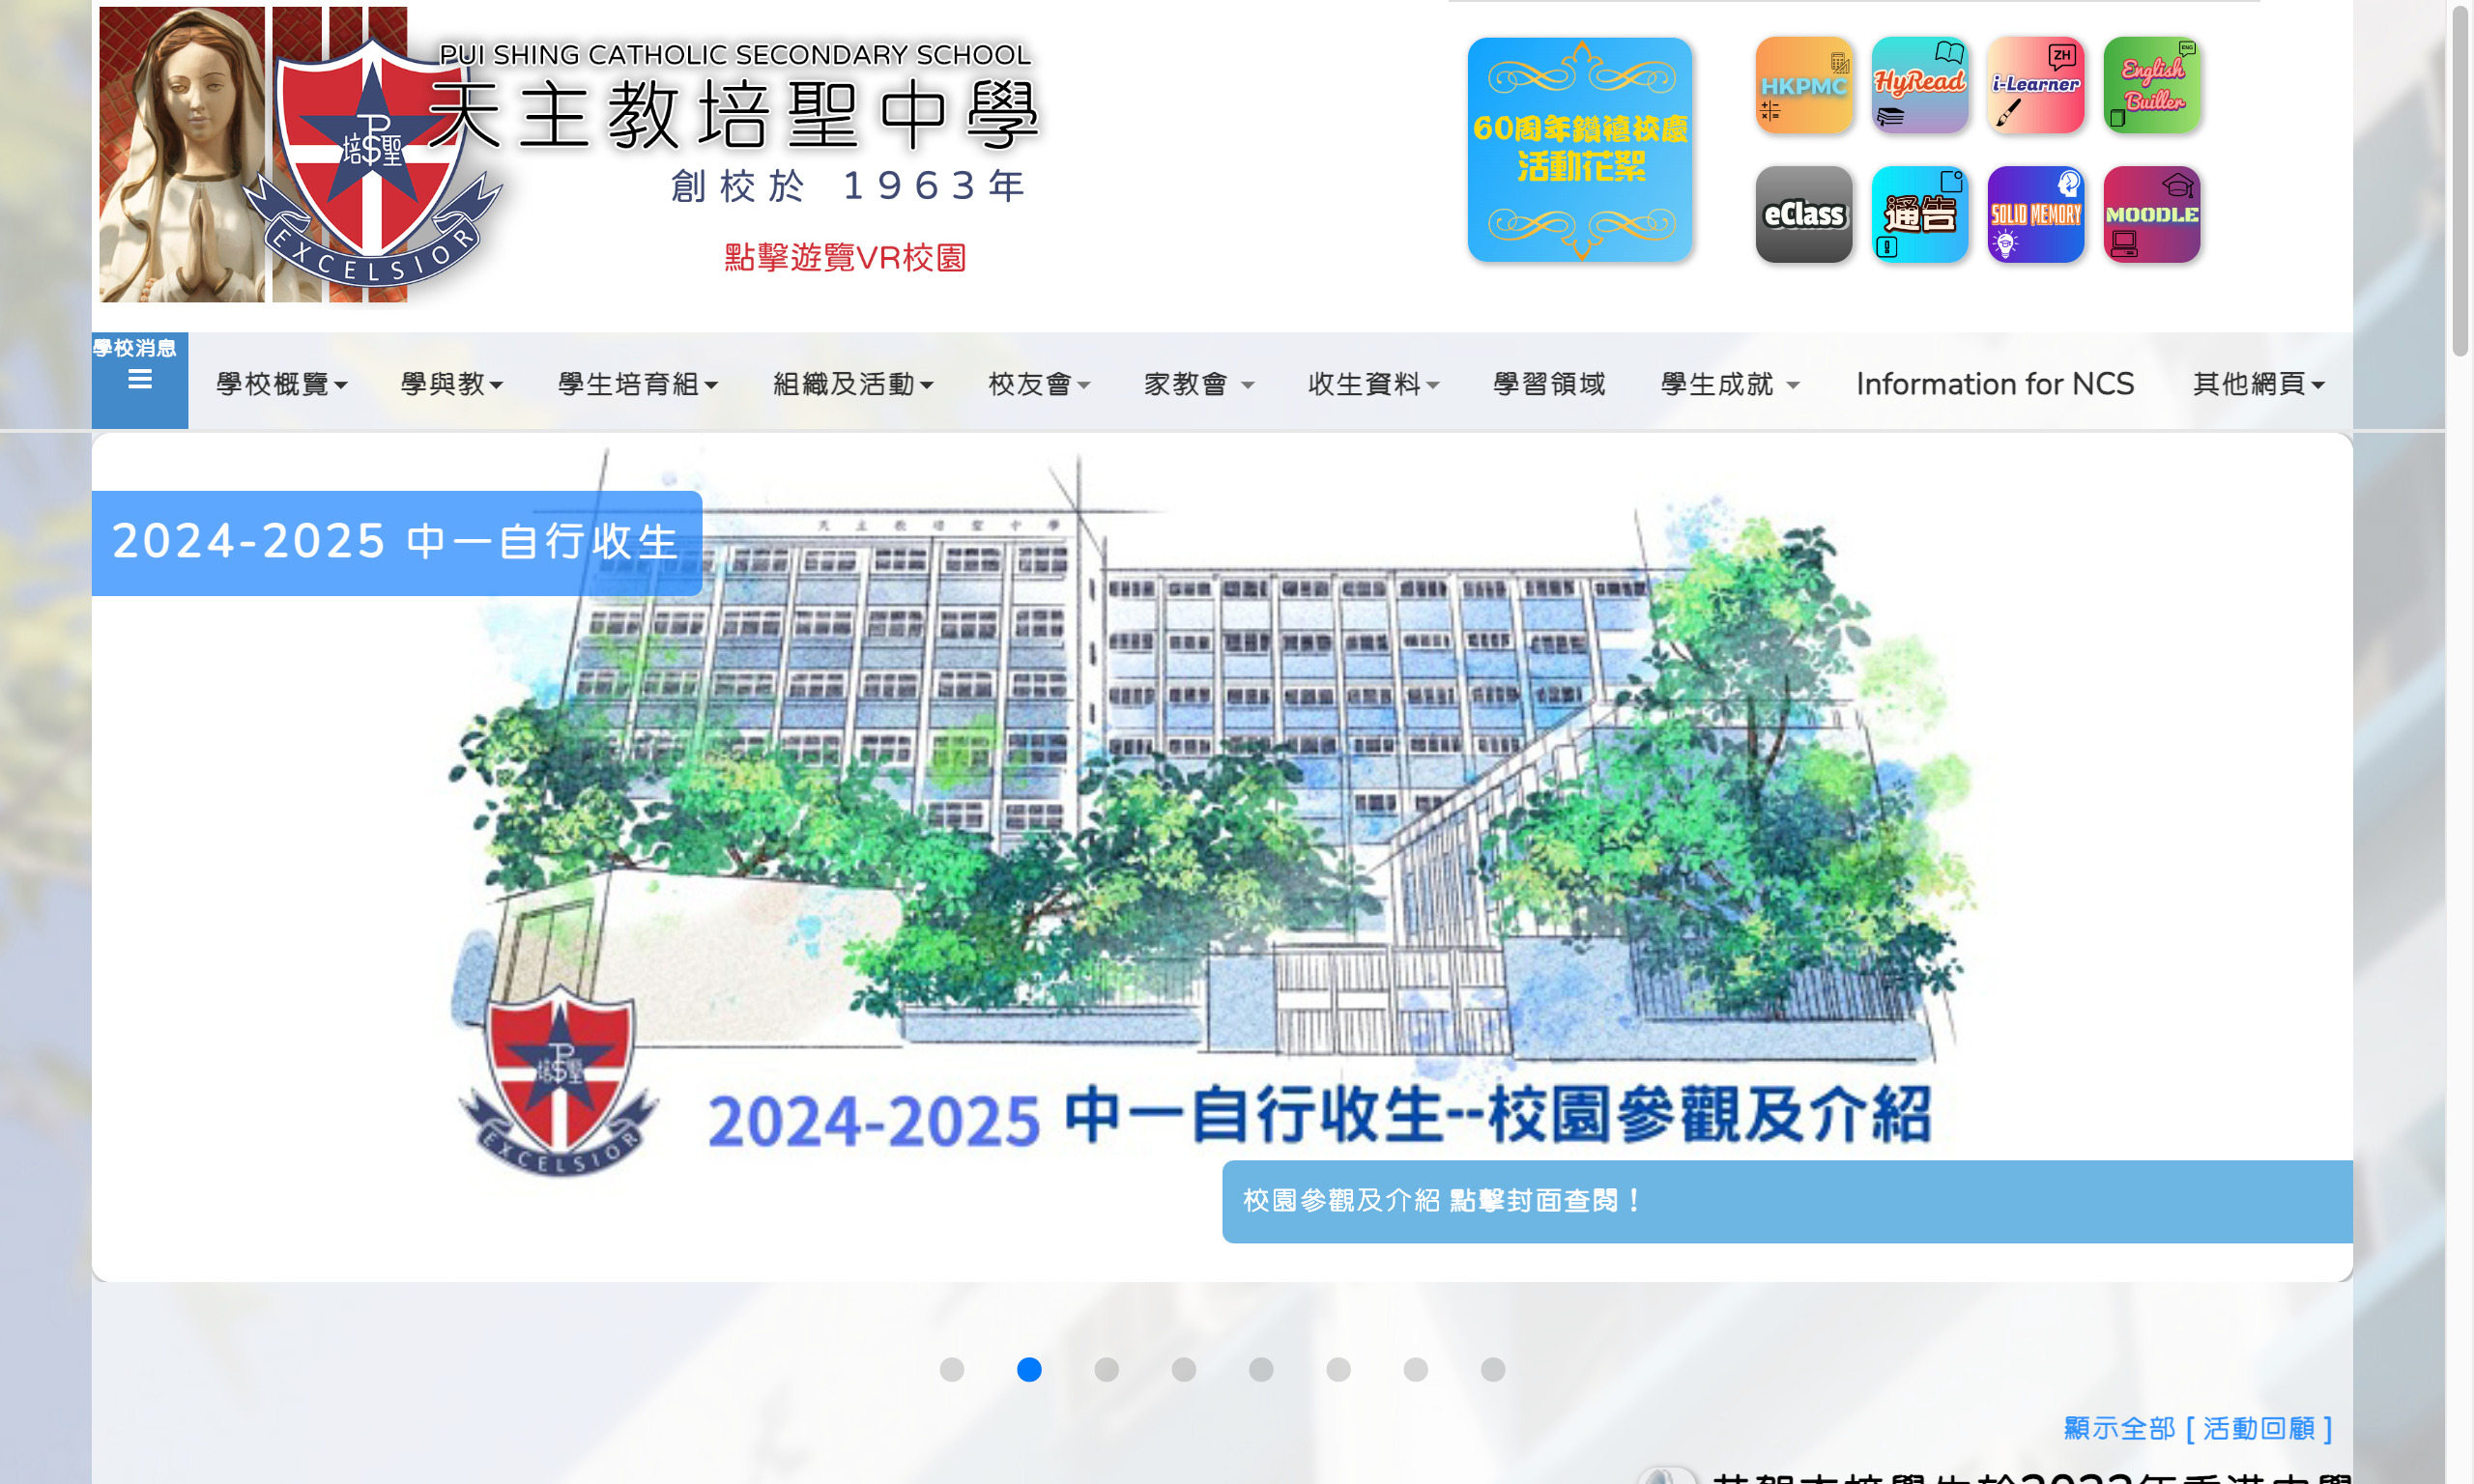 Screenshot of the Home Page of Pui Shing Catholic Secondary School